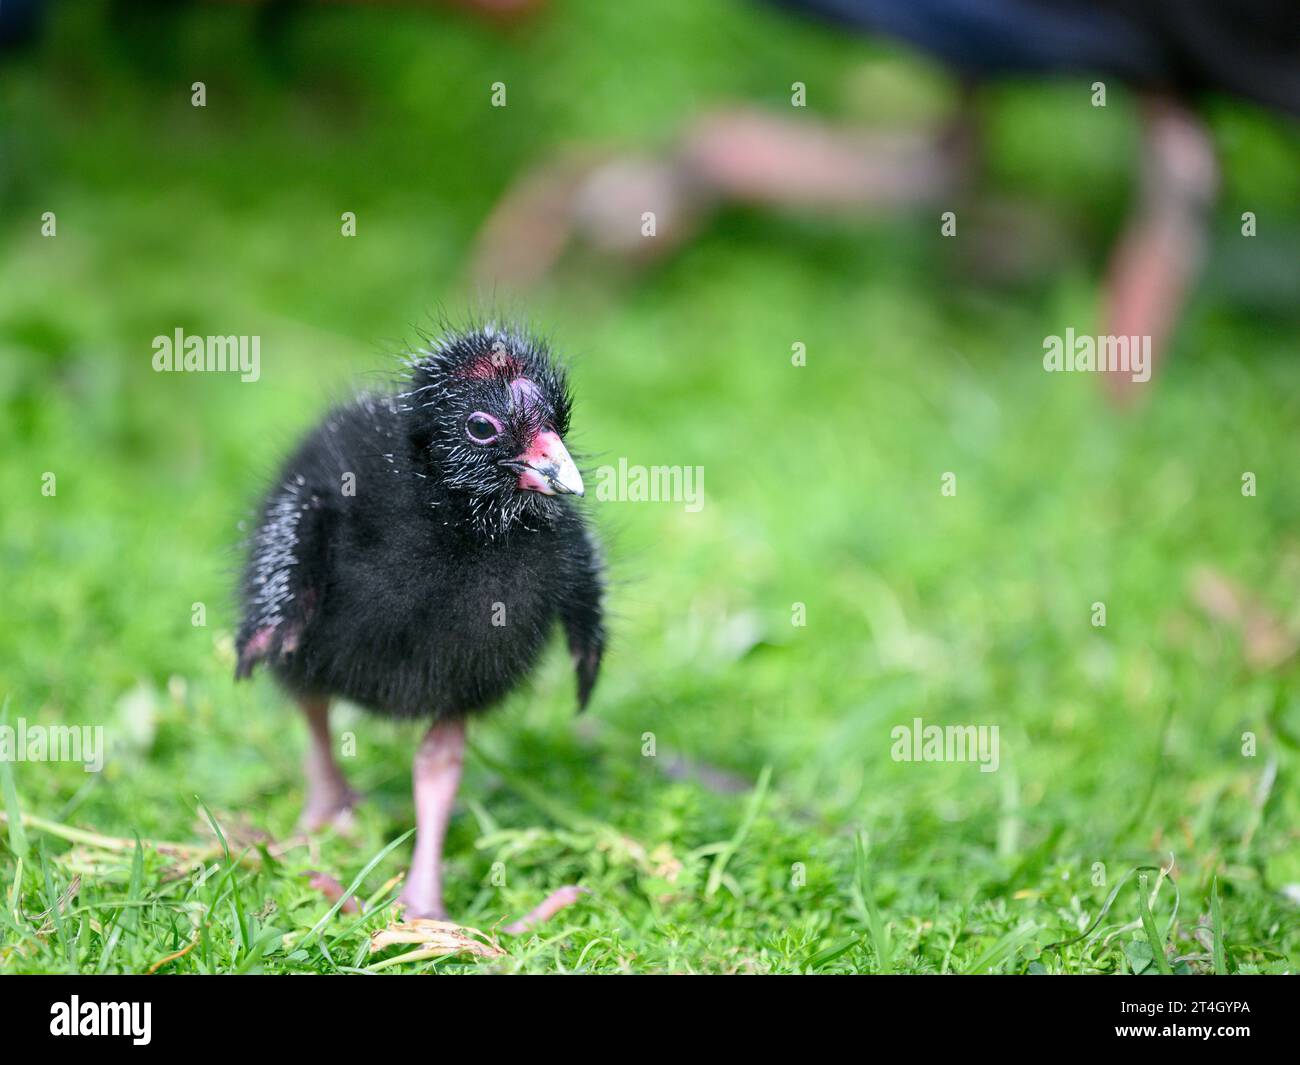 Baby Pukeko bird walking on green grass with out-of-focus mother Pukeko in the background. Western Springs park, Auckland. Stock Photo